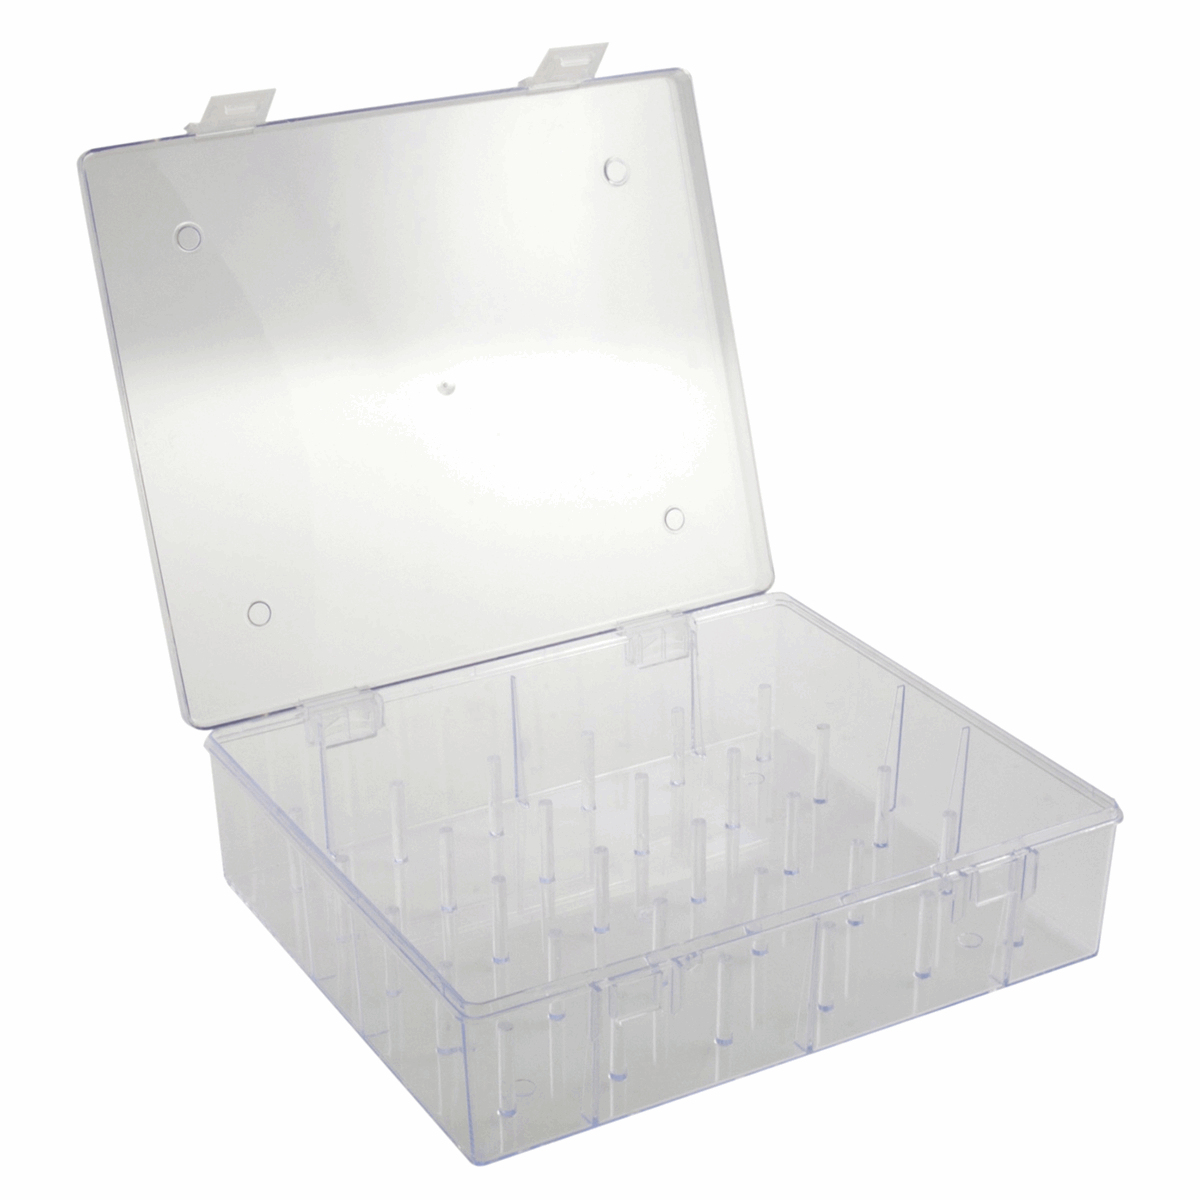 Embroidery Thread Organiser - holds 30 cones or 100 smaller cops.